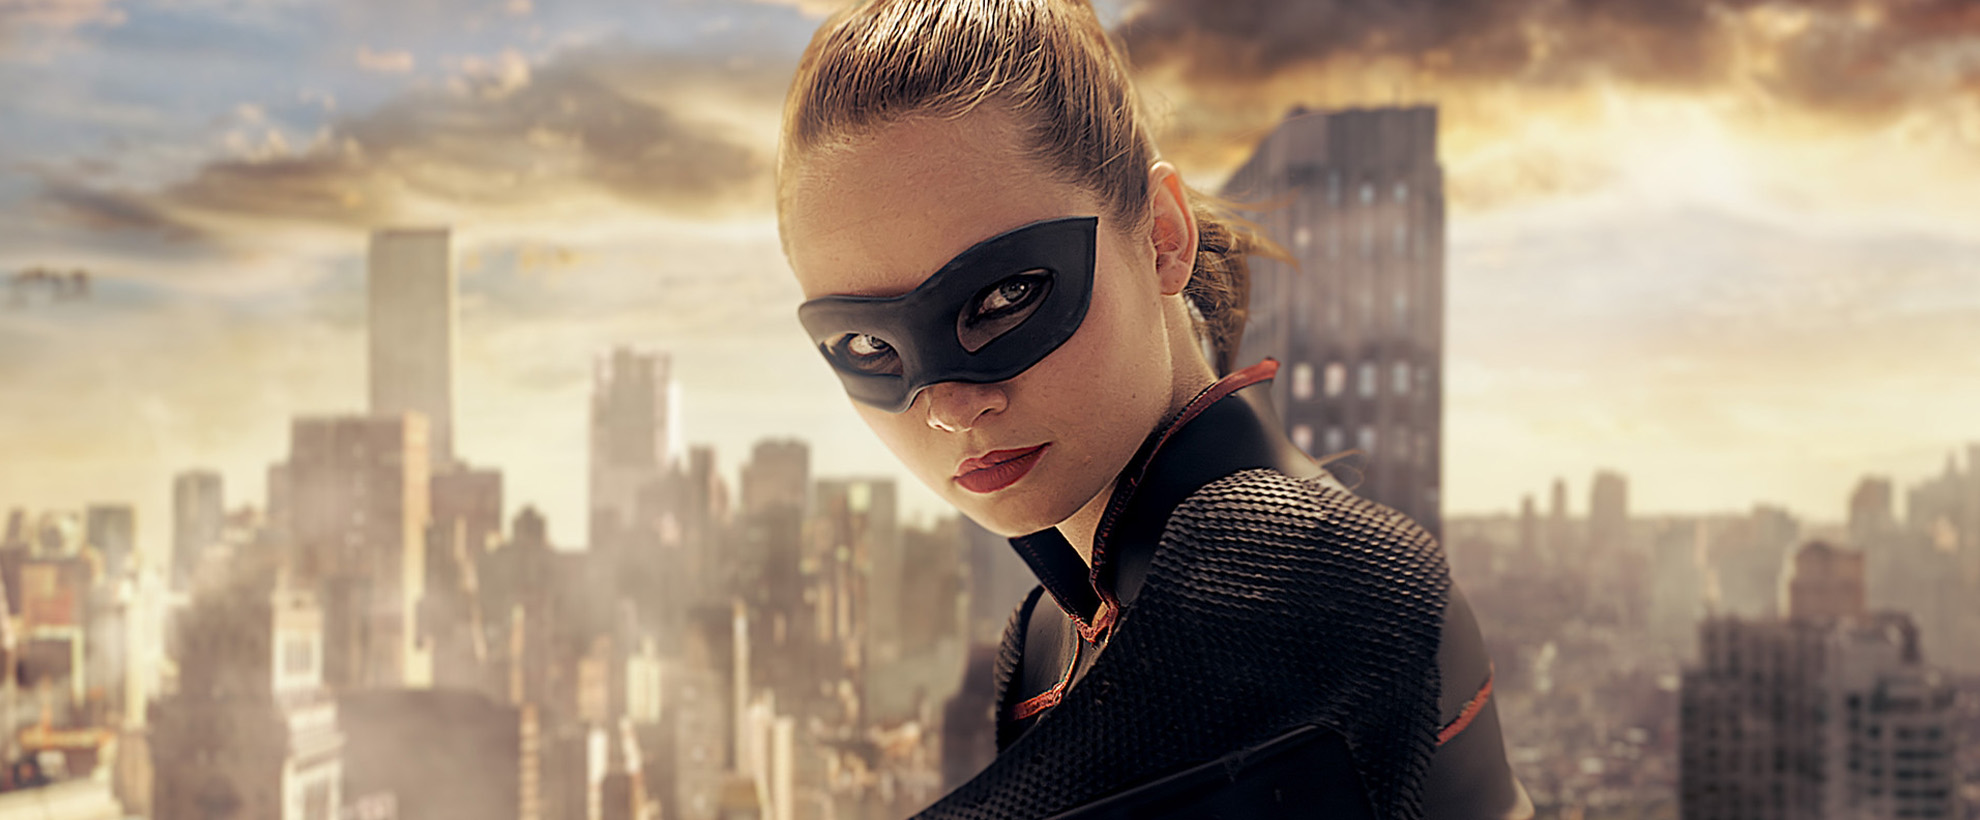 A woman with a superhero mask  standing on the top of a building with a cityscape in the background.